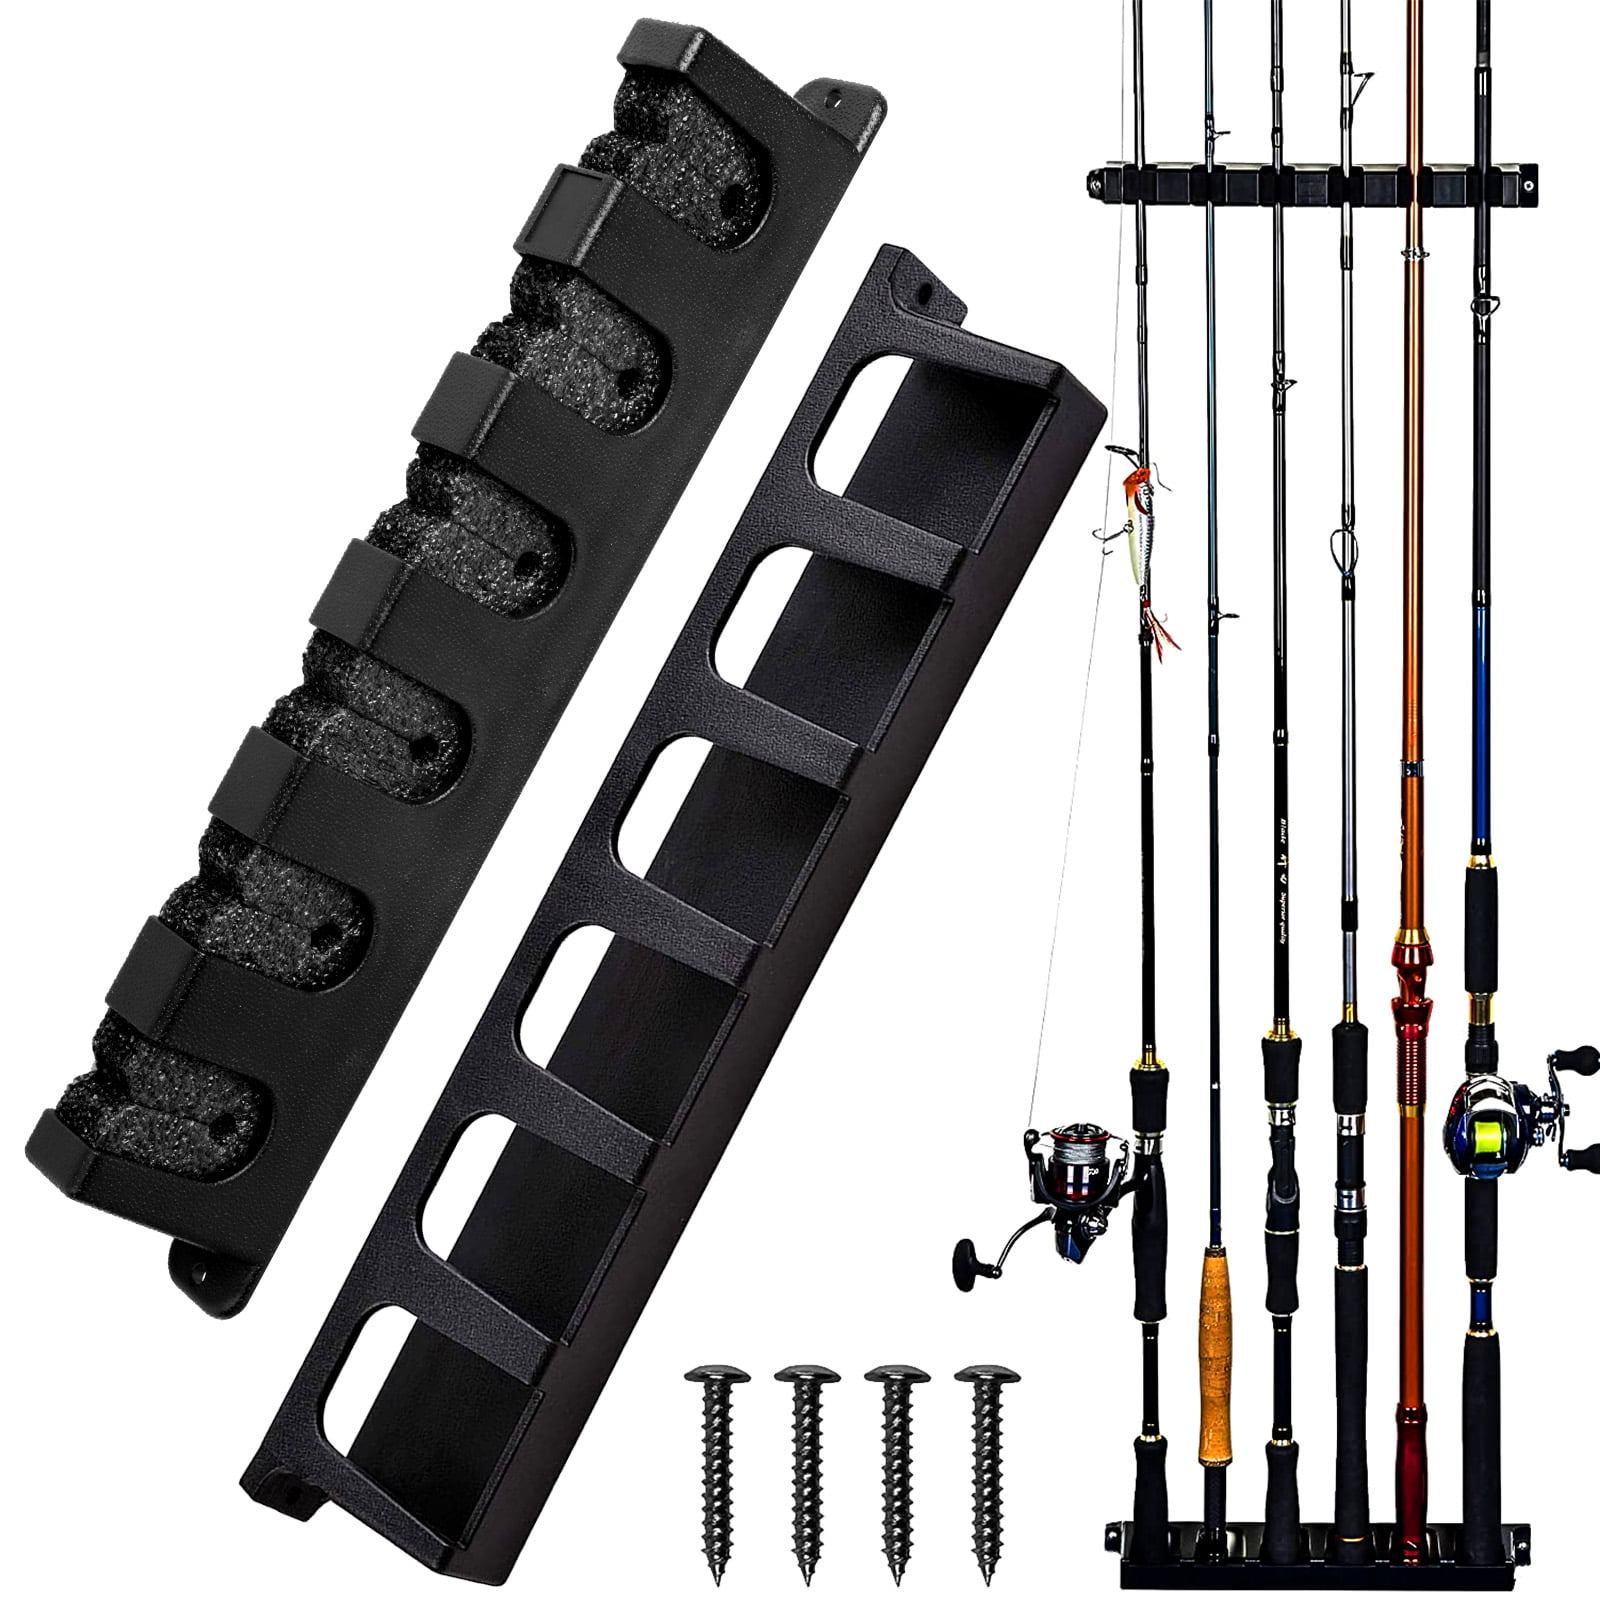 Foxtell Fishing Rod Holders for Garage, Vertical Fishing Pole